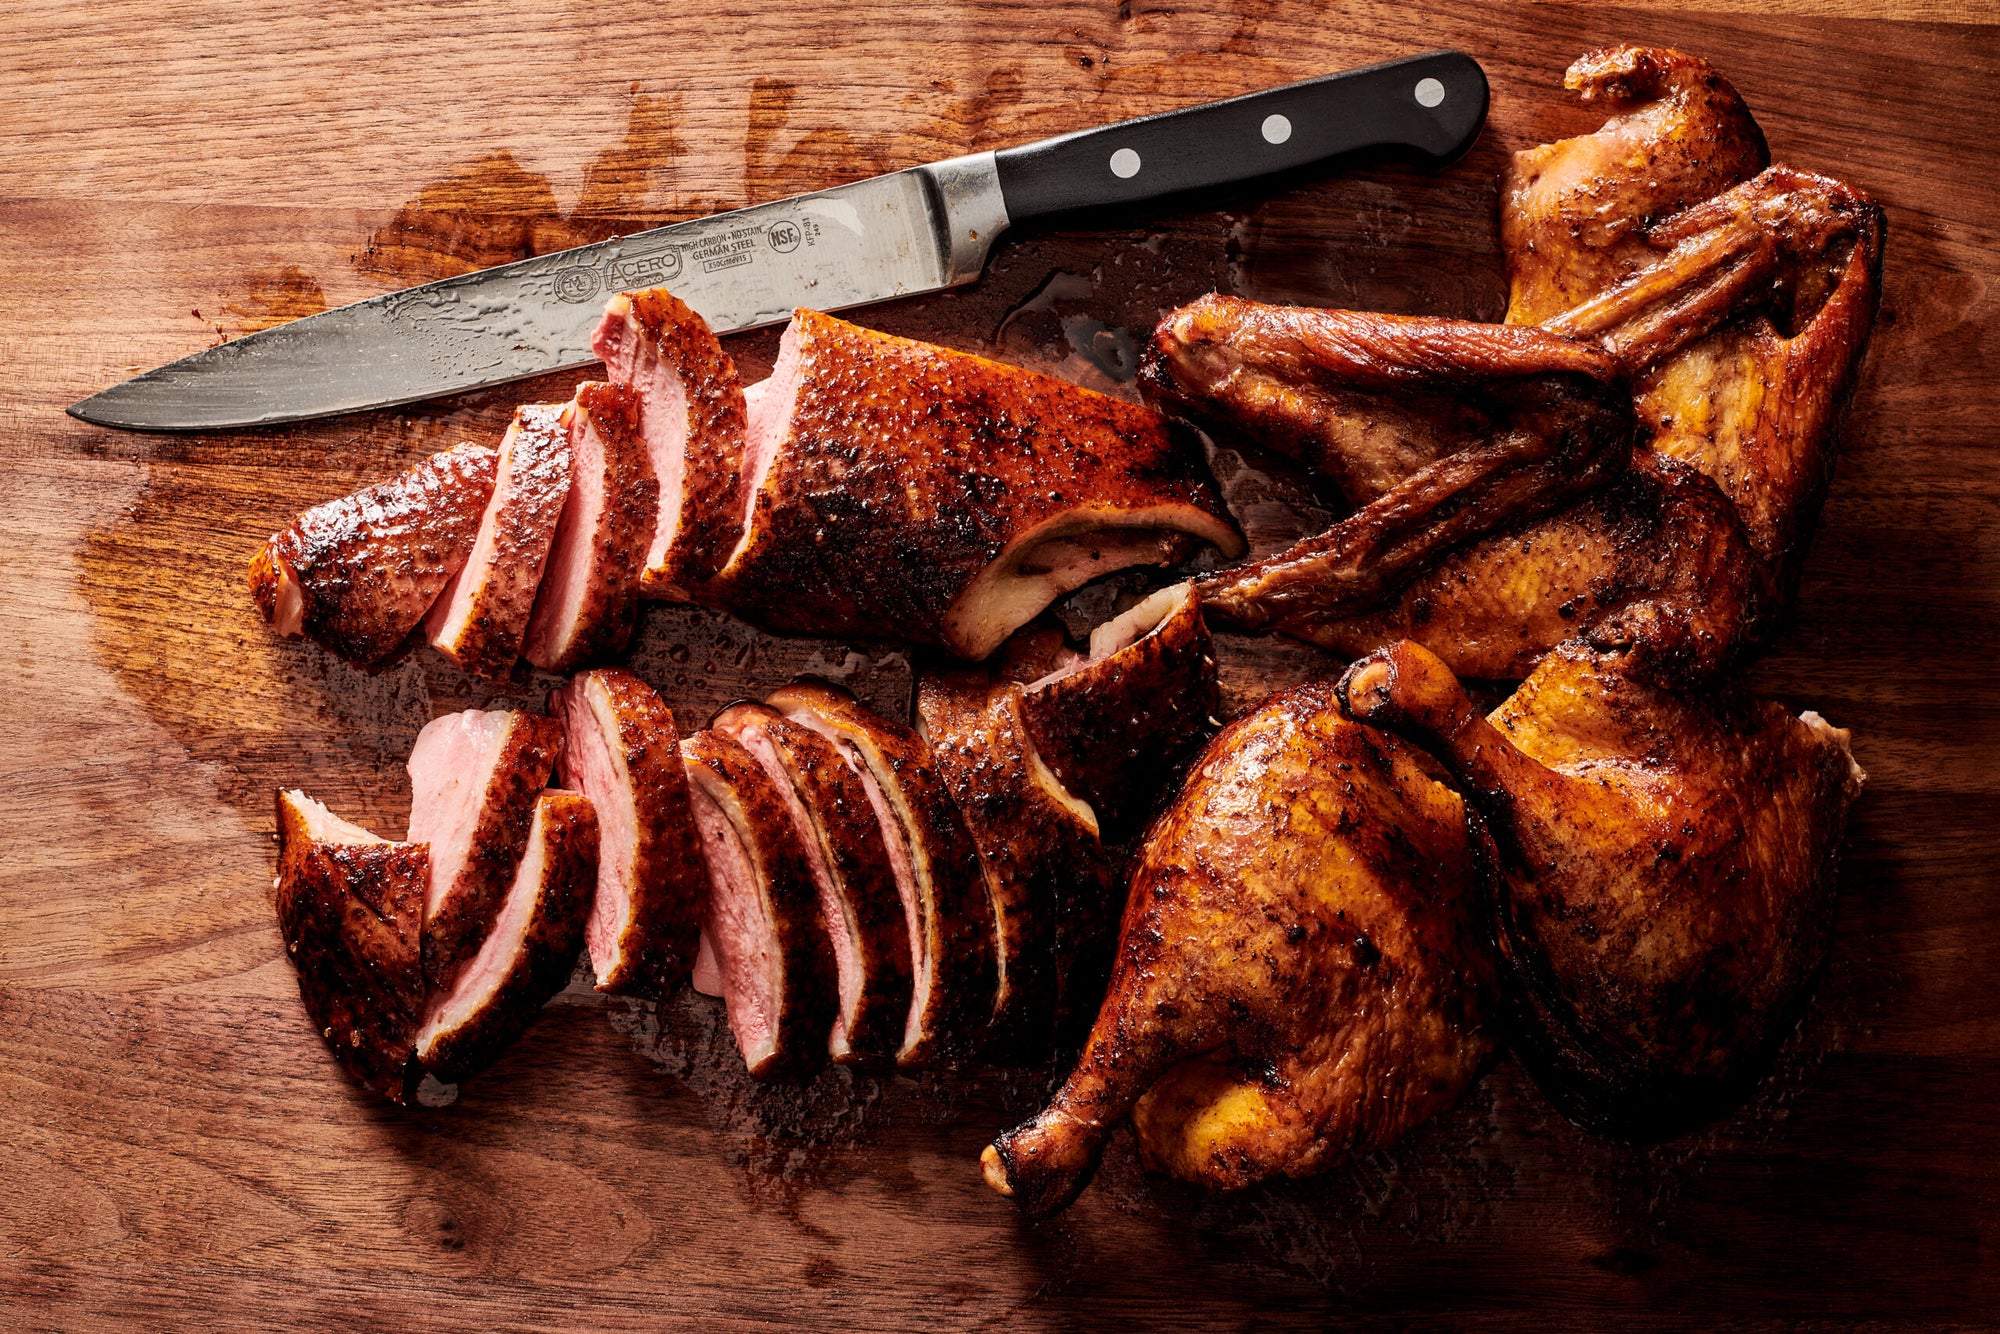 The 5 best carving knives of 2023, per culinary experts